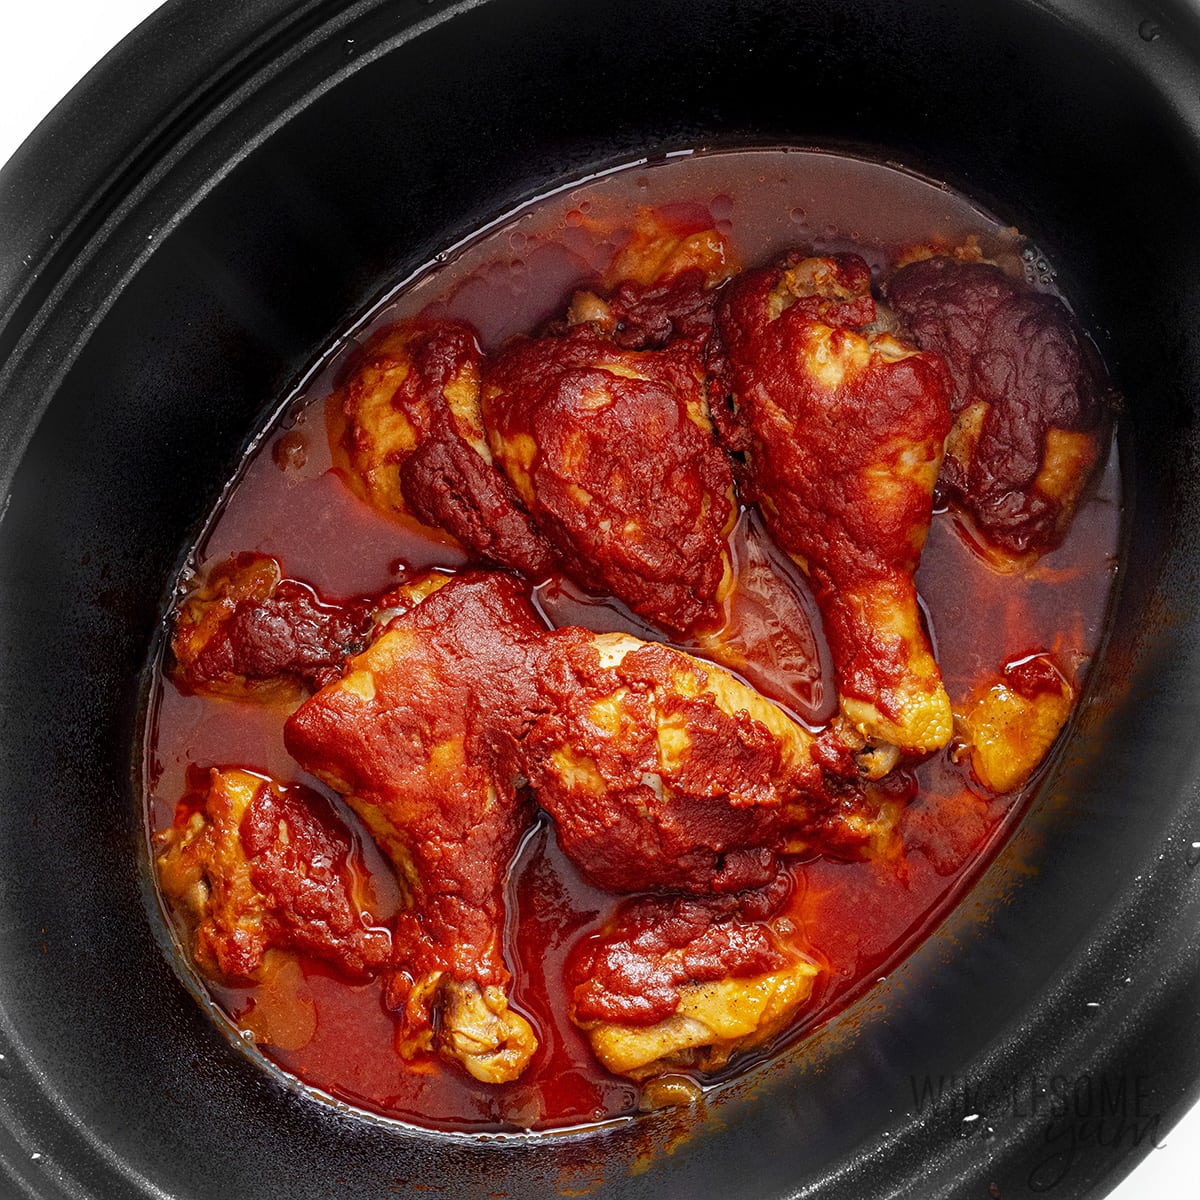 Cooked chicken legs in the Crock Pot.